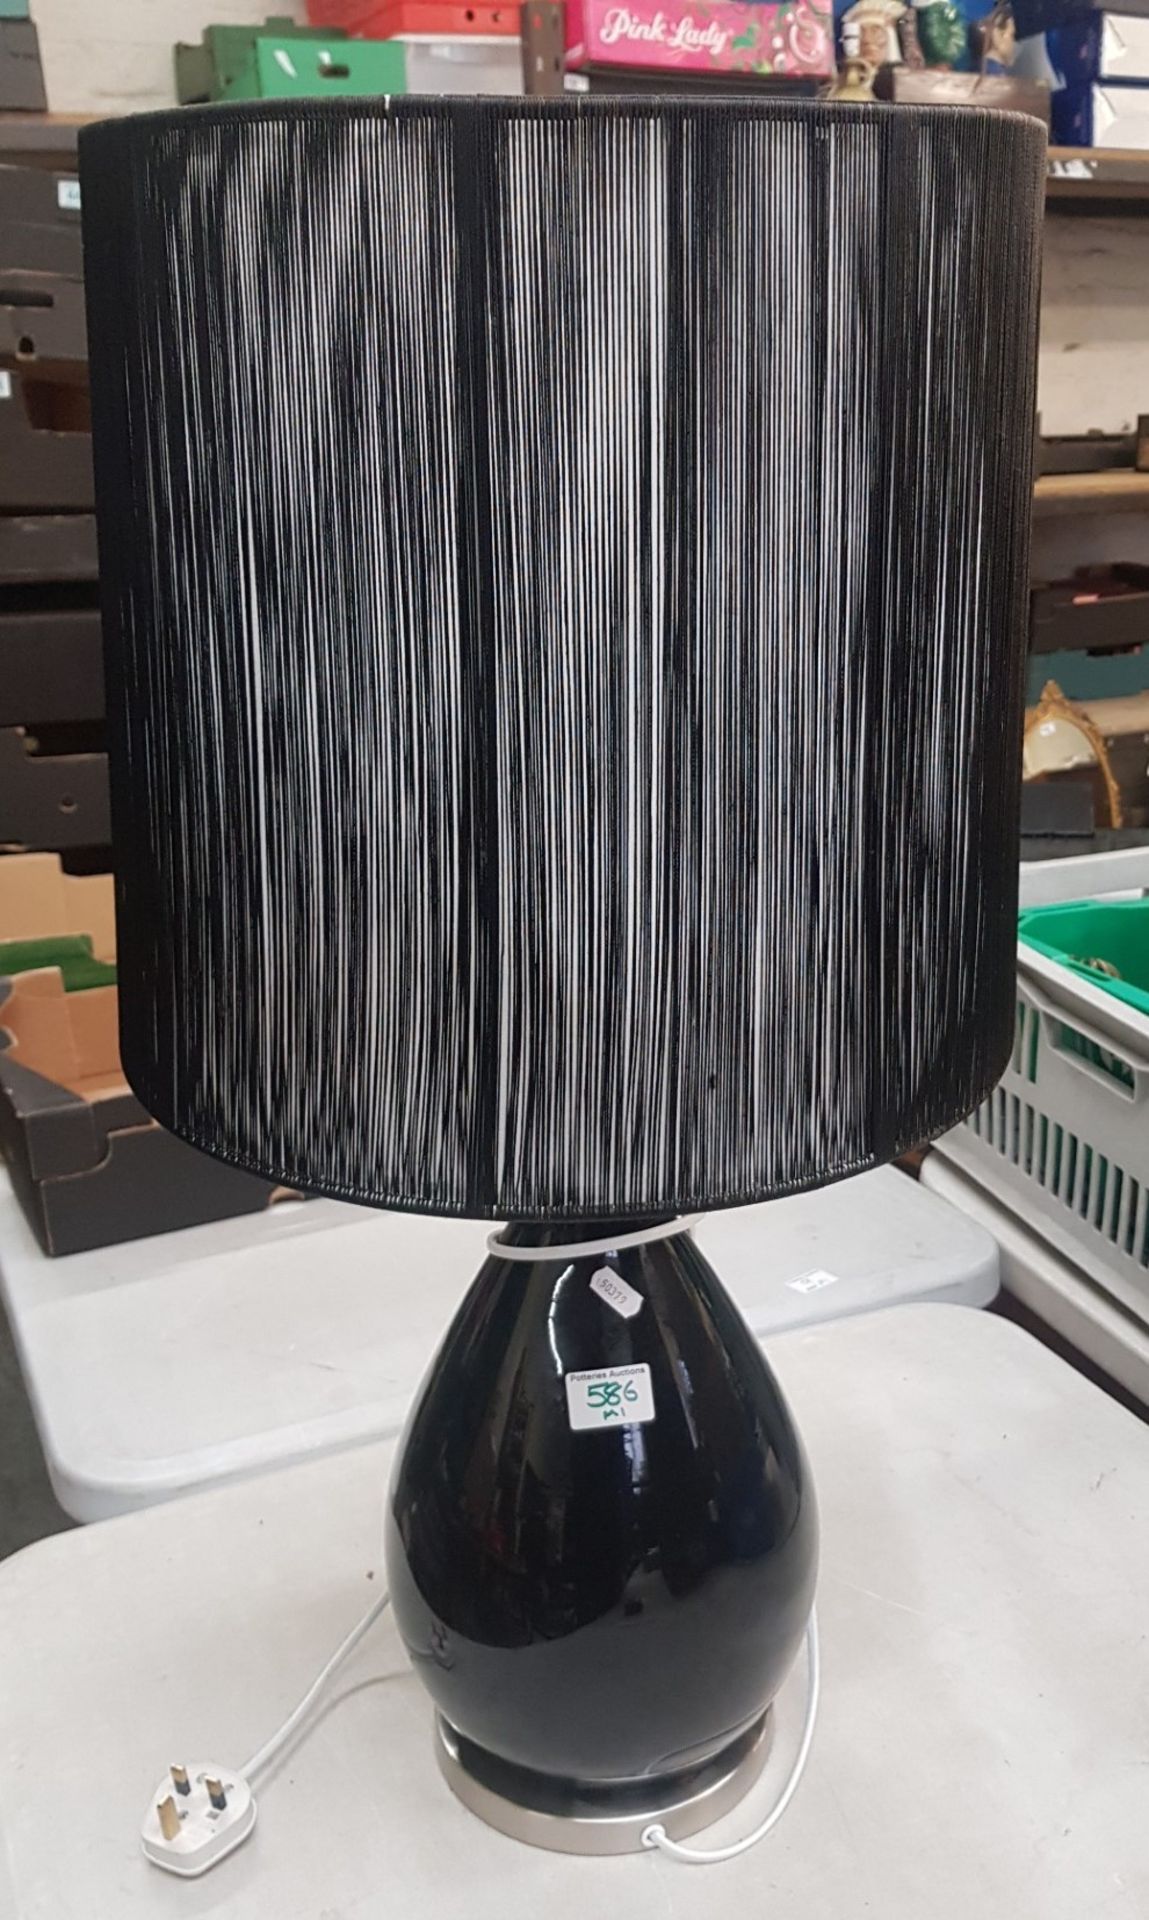 Large modern black and brushed steel table lamp, overall height 75cm. (Being sold to raise funds for